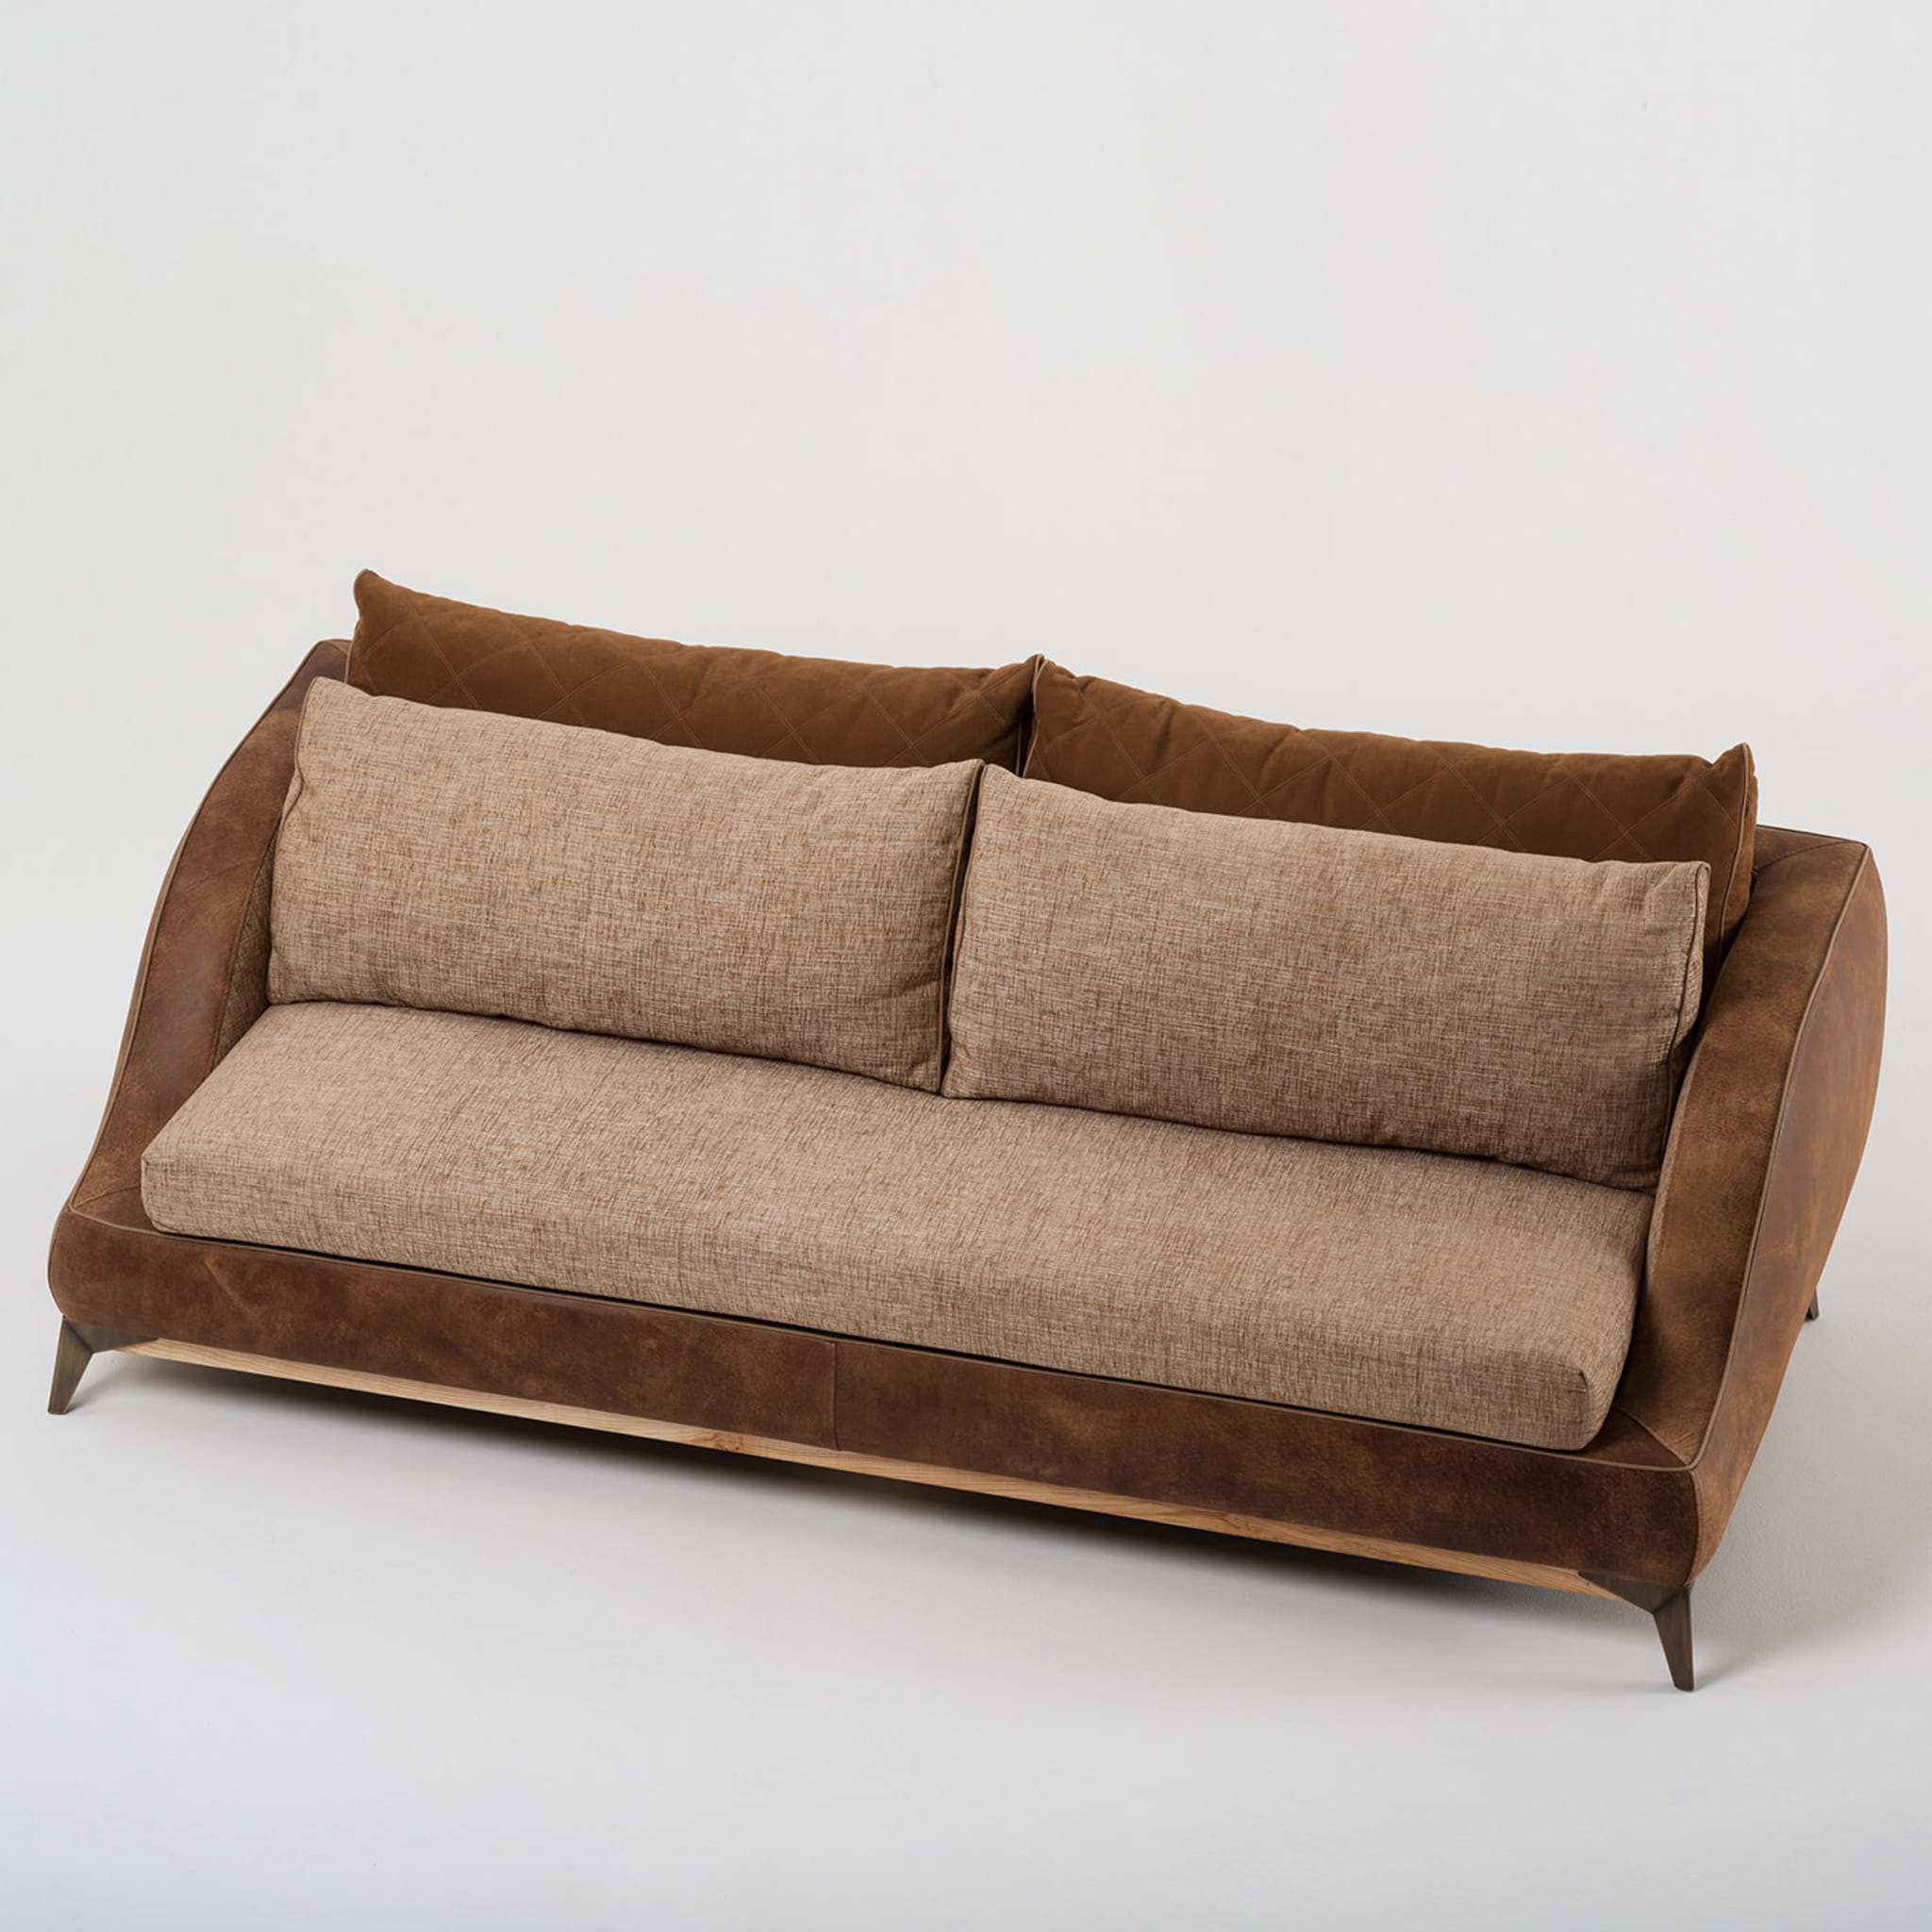 3-Seater Sofa in Leather & Fabric Combination - Alternative view 1